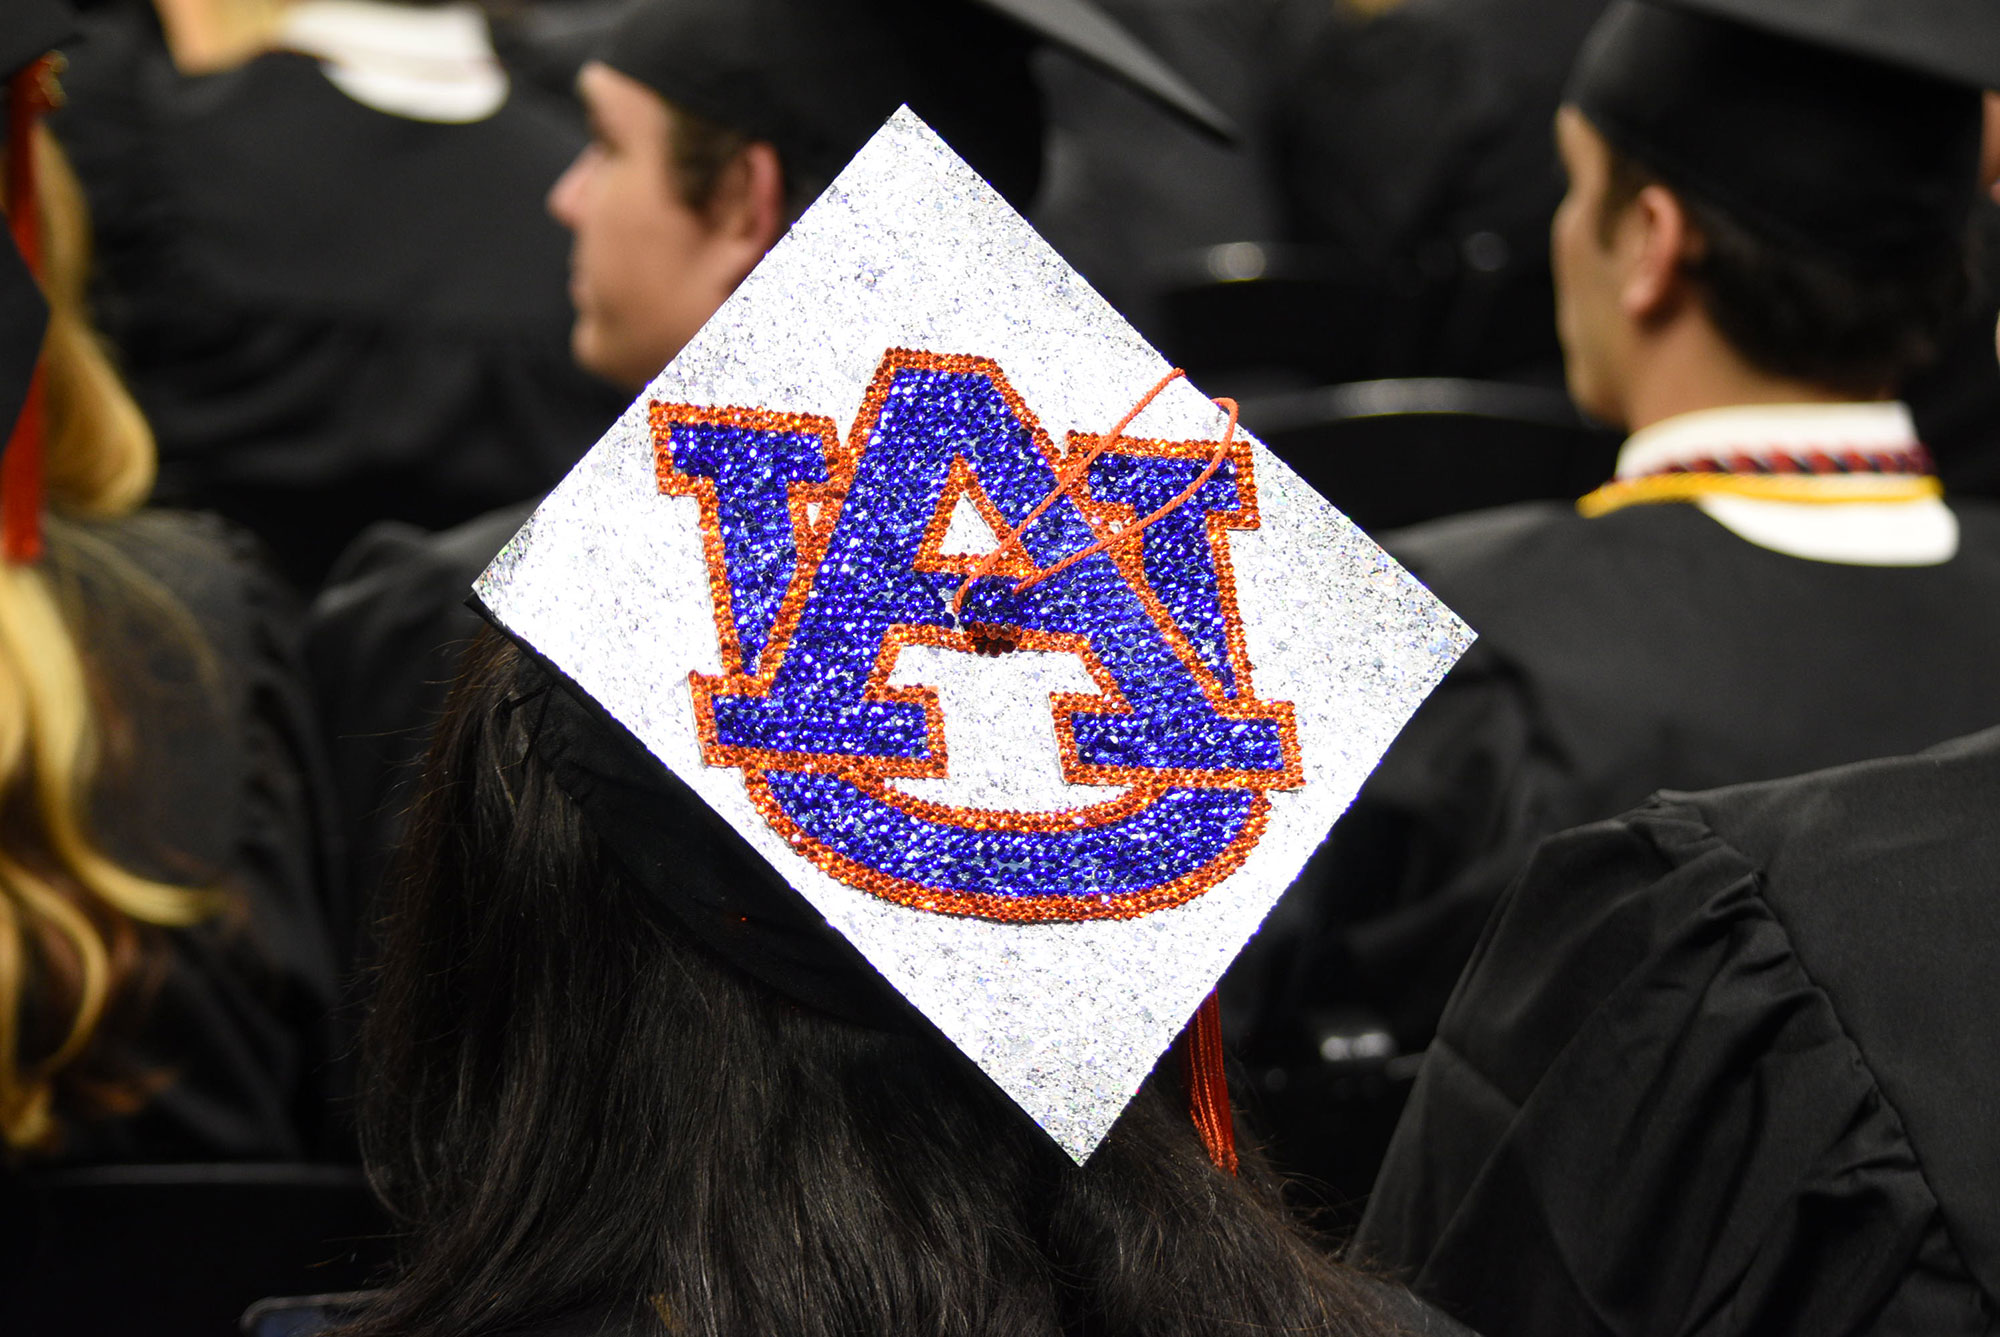 A graduation cap with the interlocking AU bedazzled on top